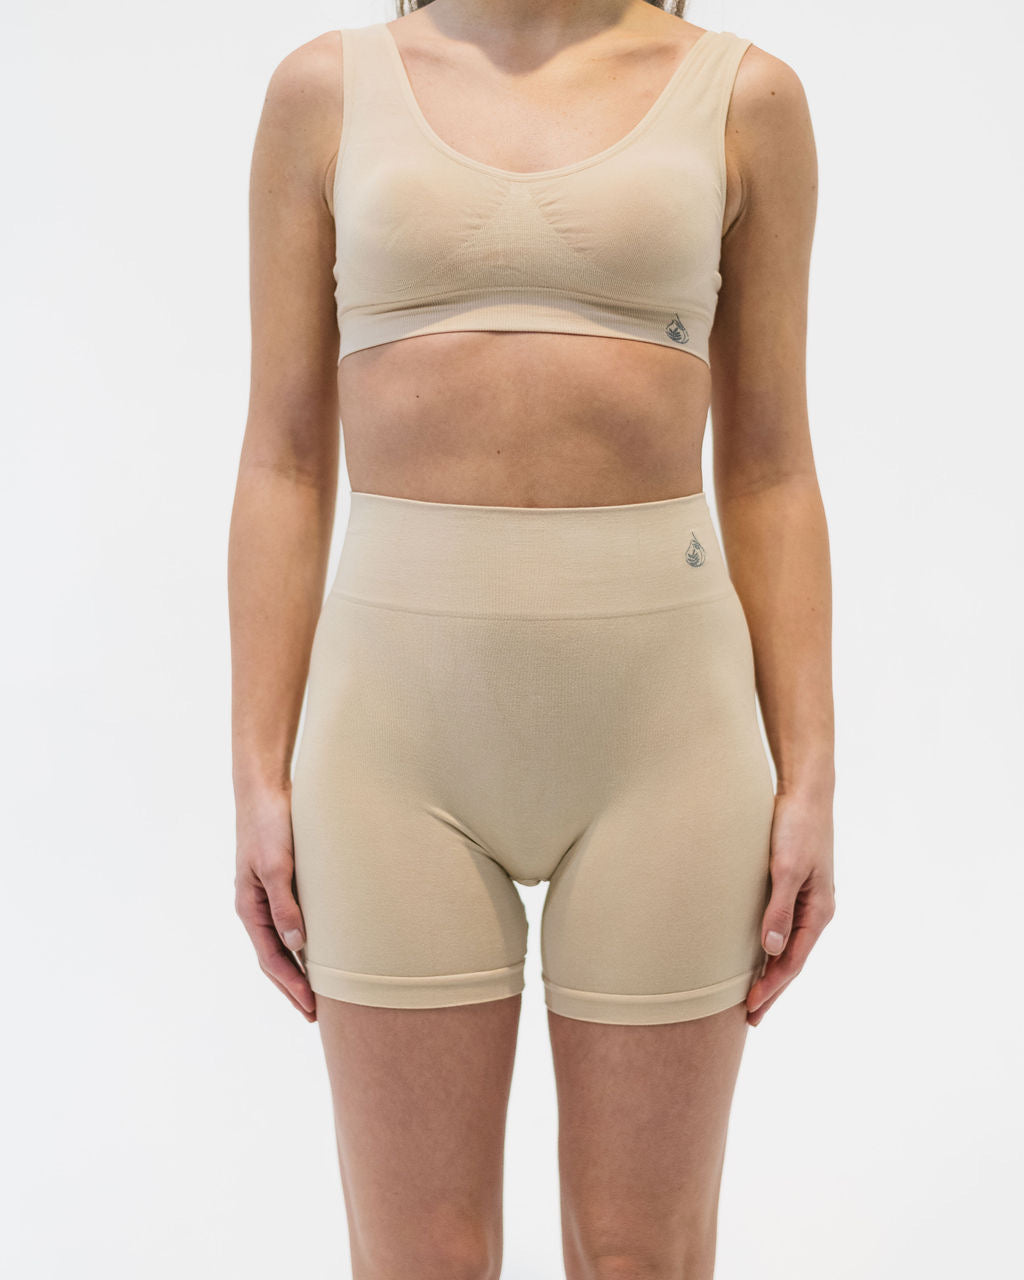 Bamboo Underwear: Everything You Need to Know - Cliché Magazine